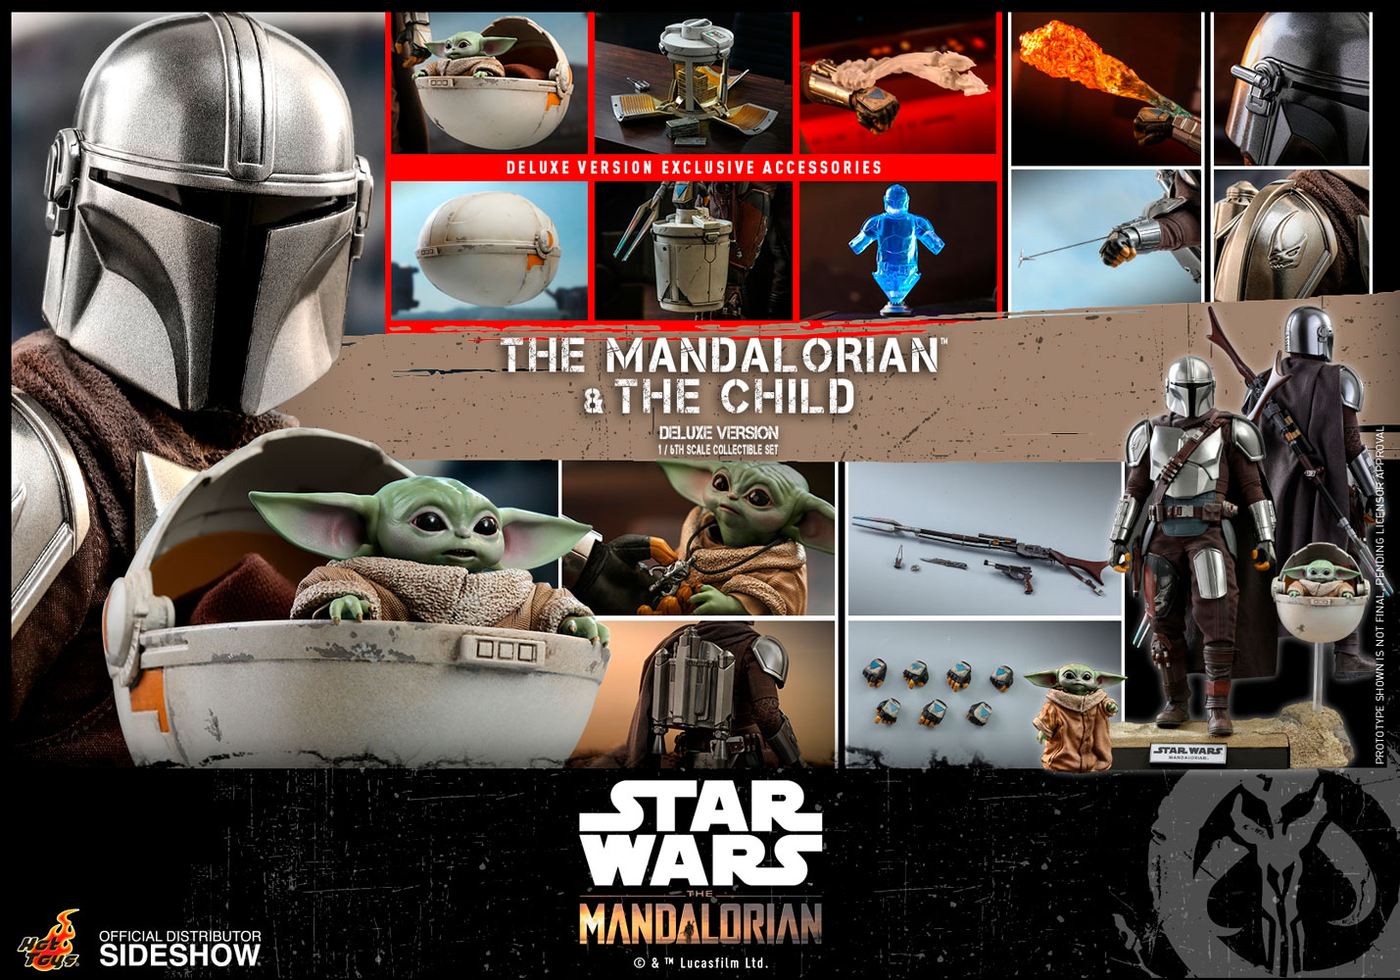 Hot Toys Star Wars Mandalorian The Child 1/4 Scale Figure New In Stock